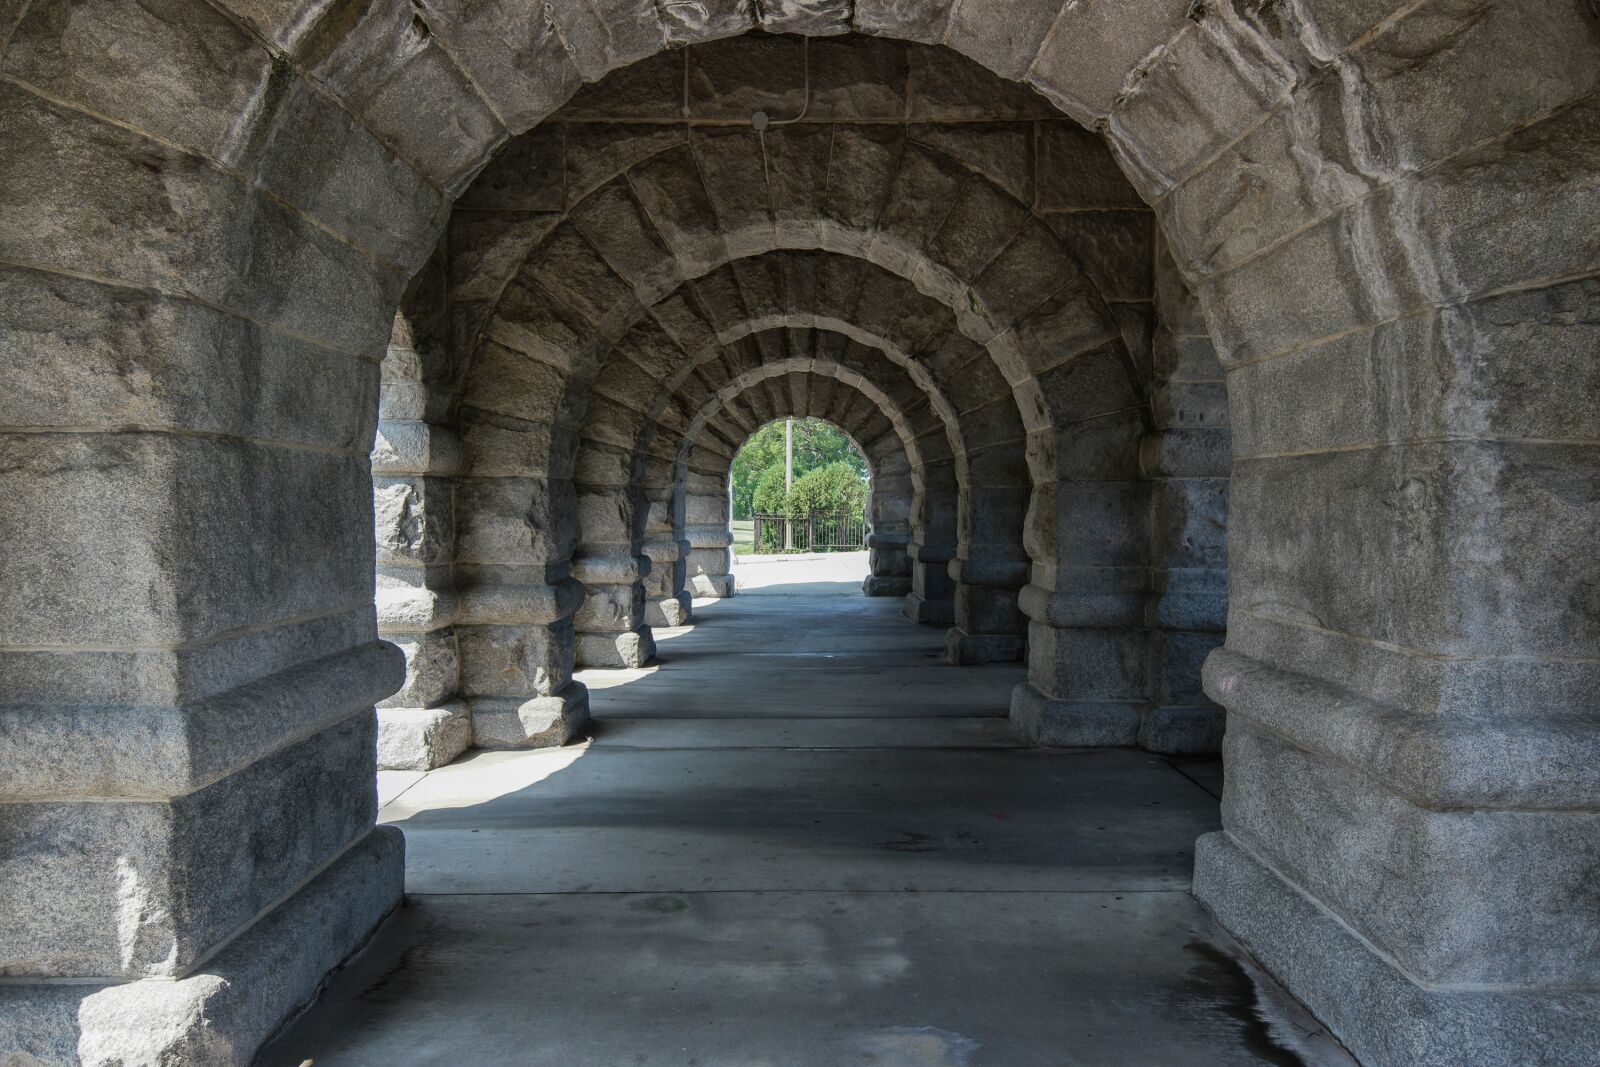 Samsung NX500 sample photo. Arches, architecture, old photography